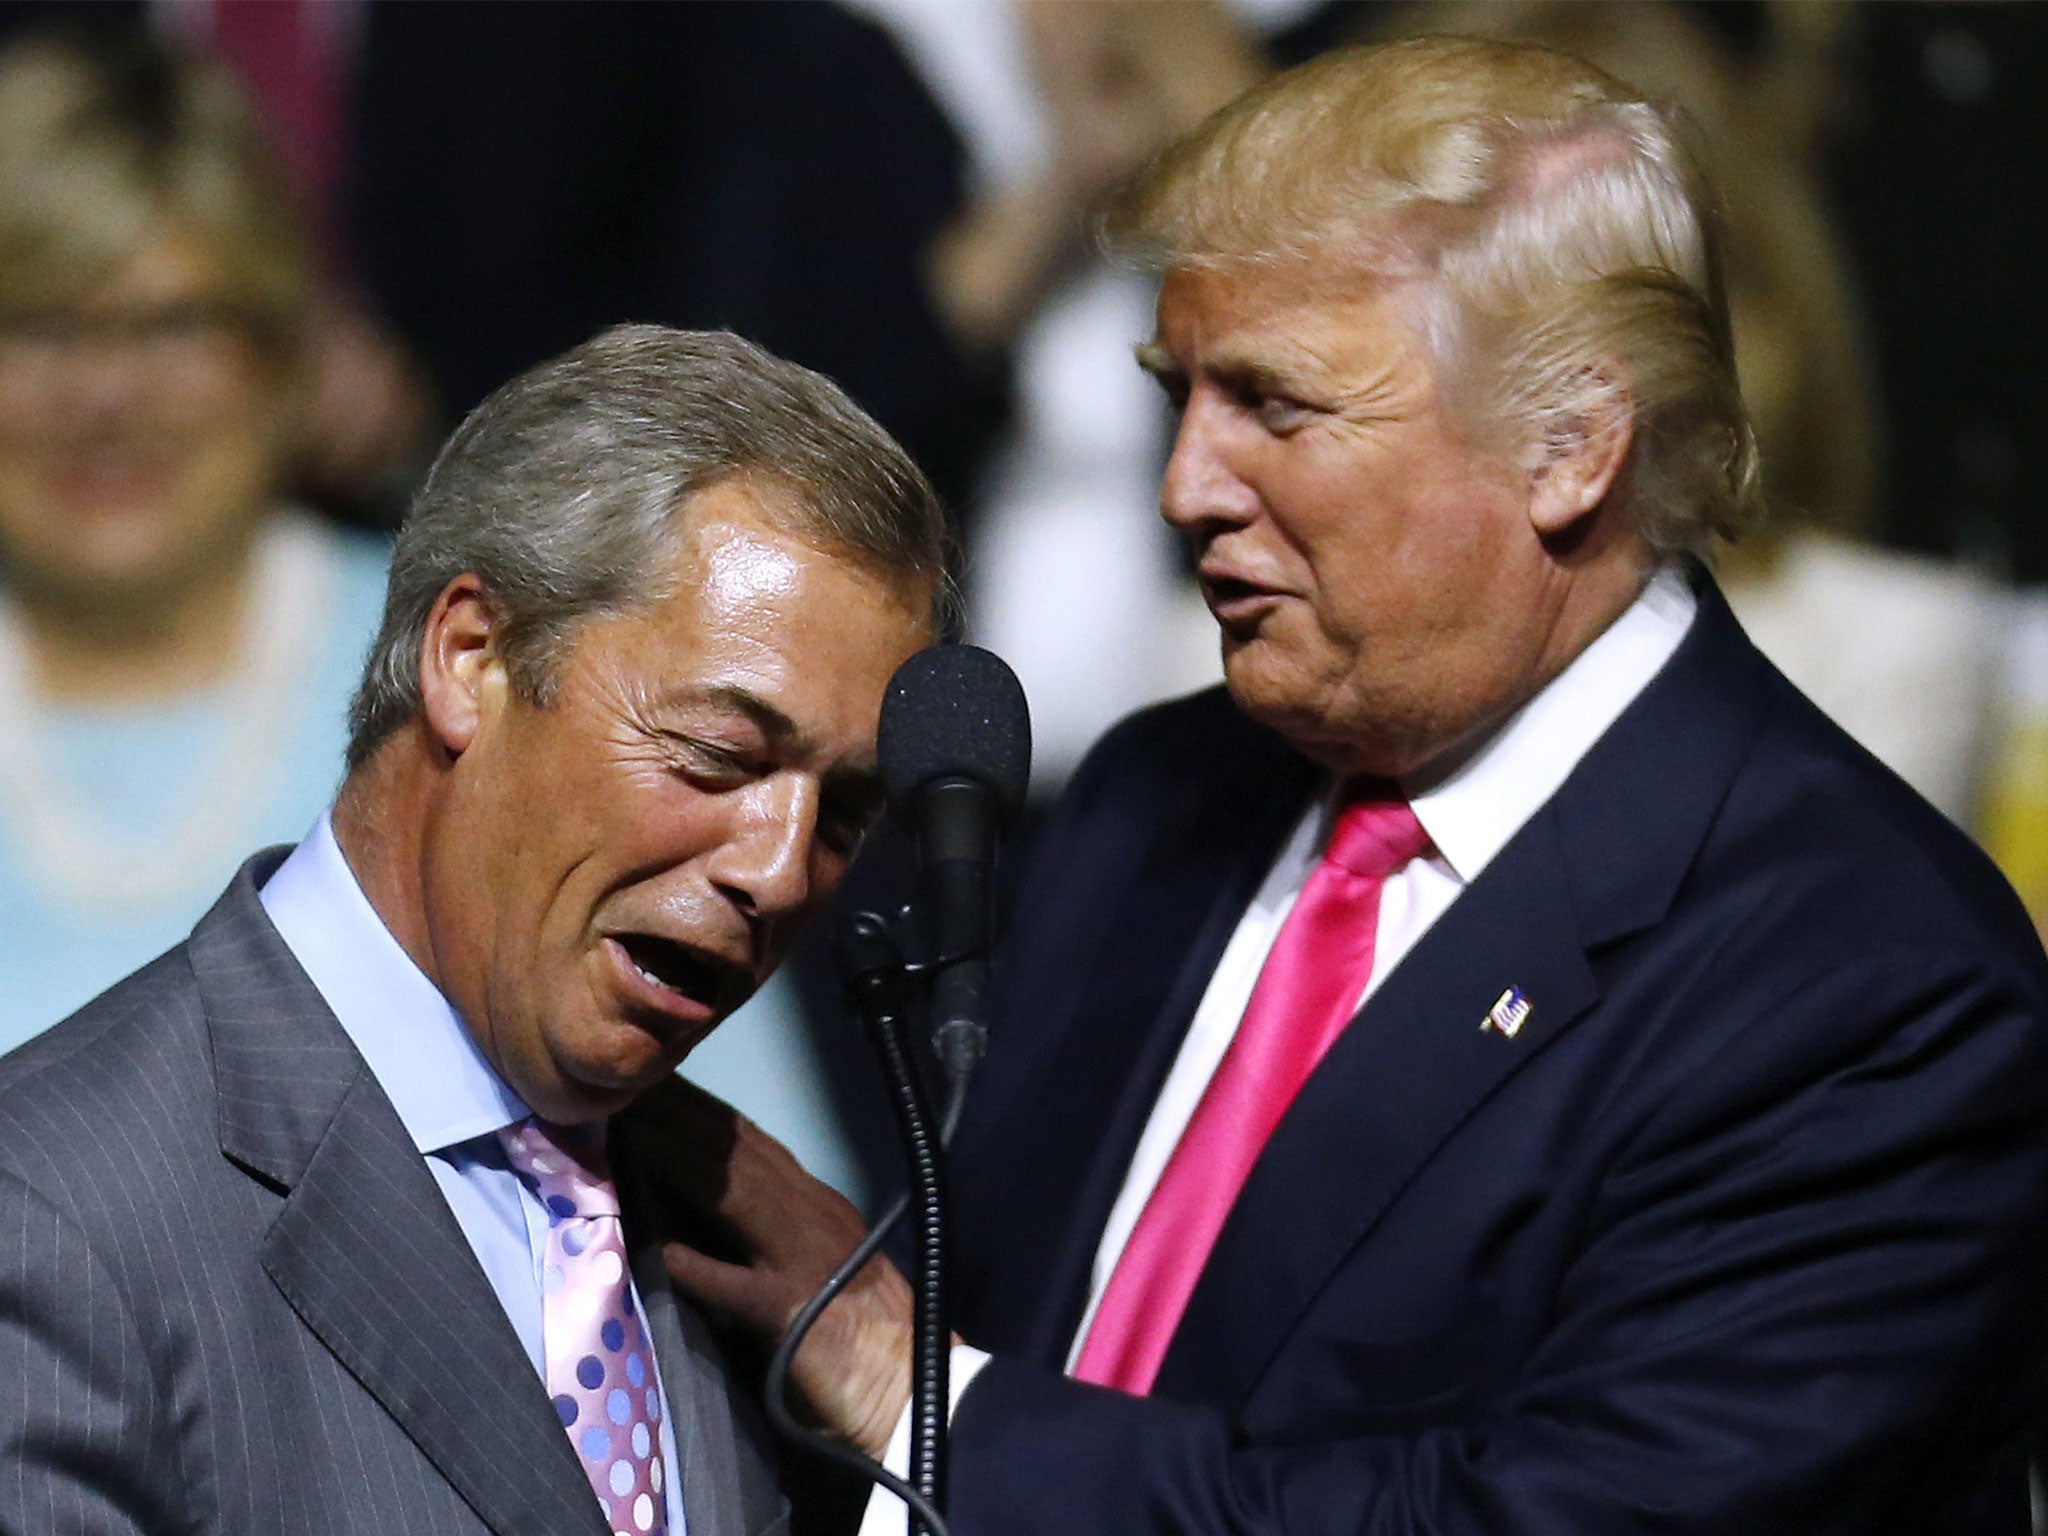 Donald Trump, right, greeting former Ukip leader Nigel Farage during a campaign rally in August 2016